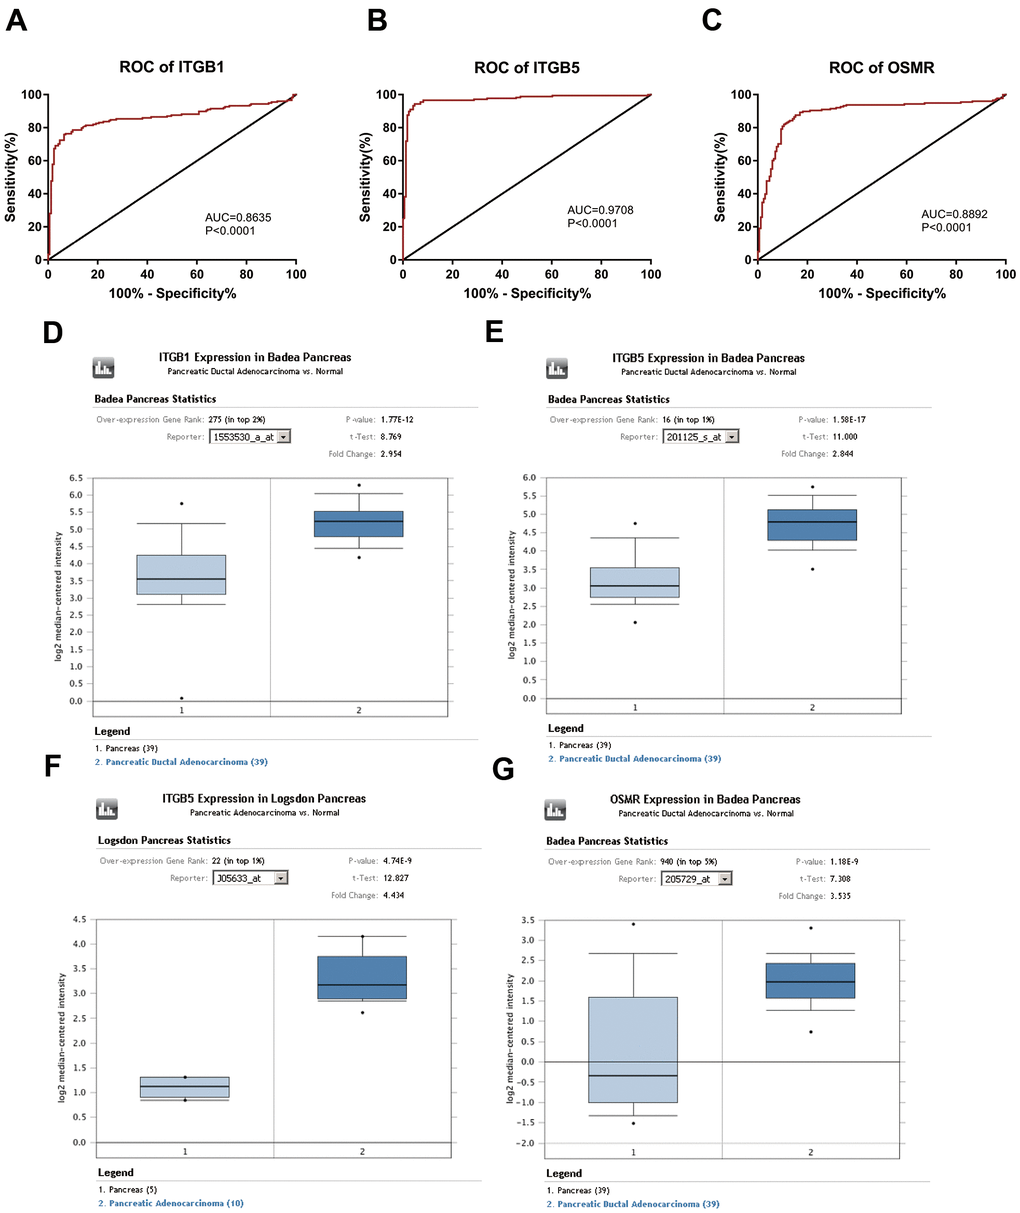 Diagnostic significance of three key genes and validation of the expression levels of key genes. (A–C) ROC curves and AUC were utilized to evaluate the specificity and sensitivity of key genes on PAAD diagnosis. (D–G) Data from Oncomine datasets confirmed that ITGB1, ITGB5, and OSMR were significantly increased in PAAD tissues compared with normal controls. ROC, receiver operating characteristic; AUC, area under the curve; PAAD, pancreatic adenocarcinoma.